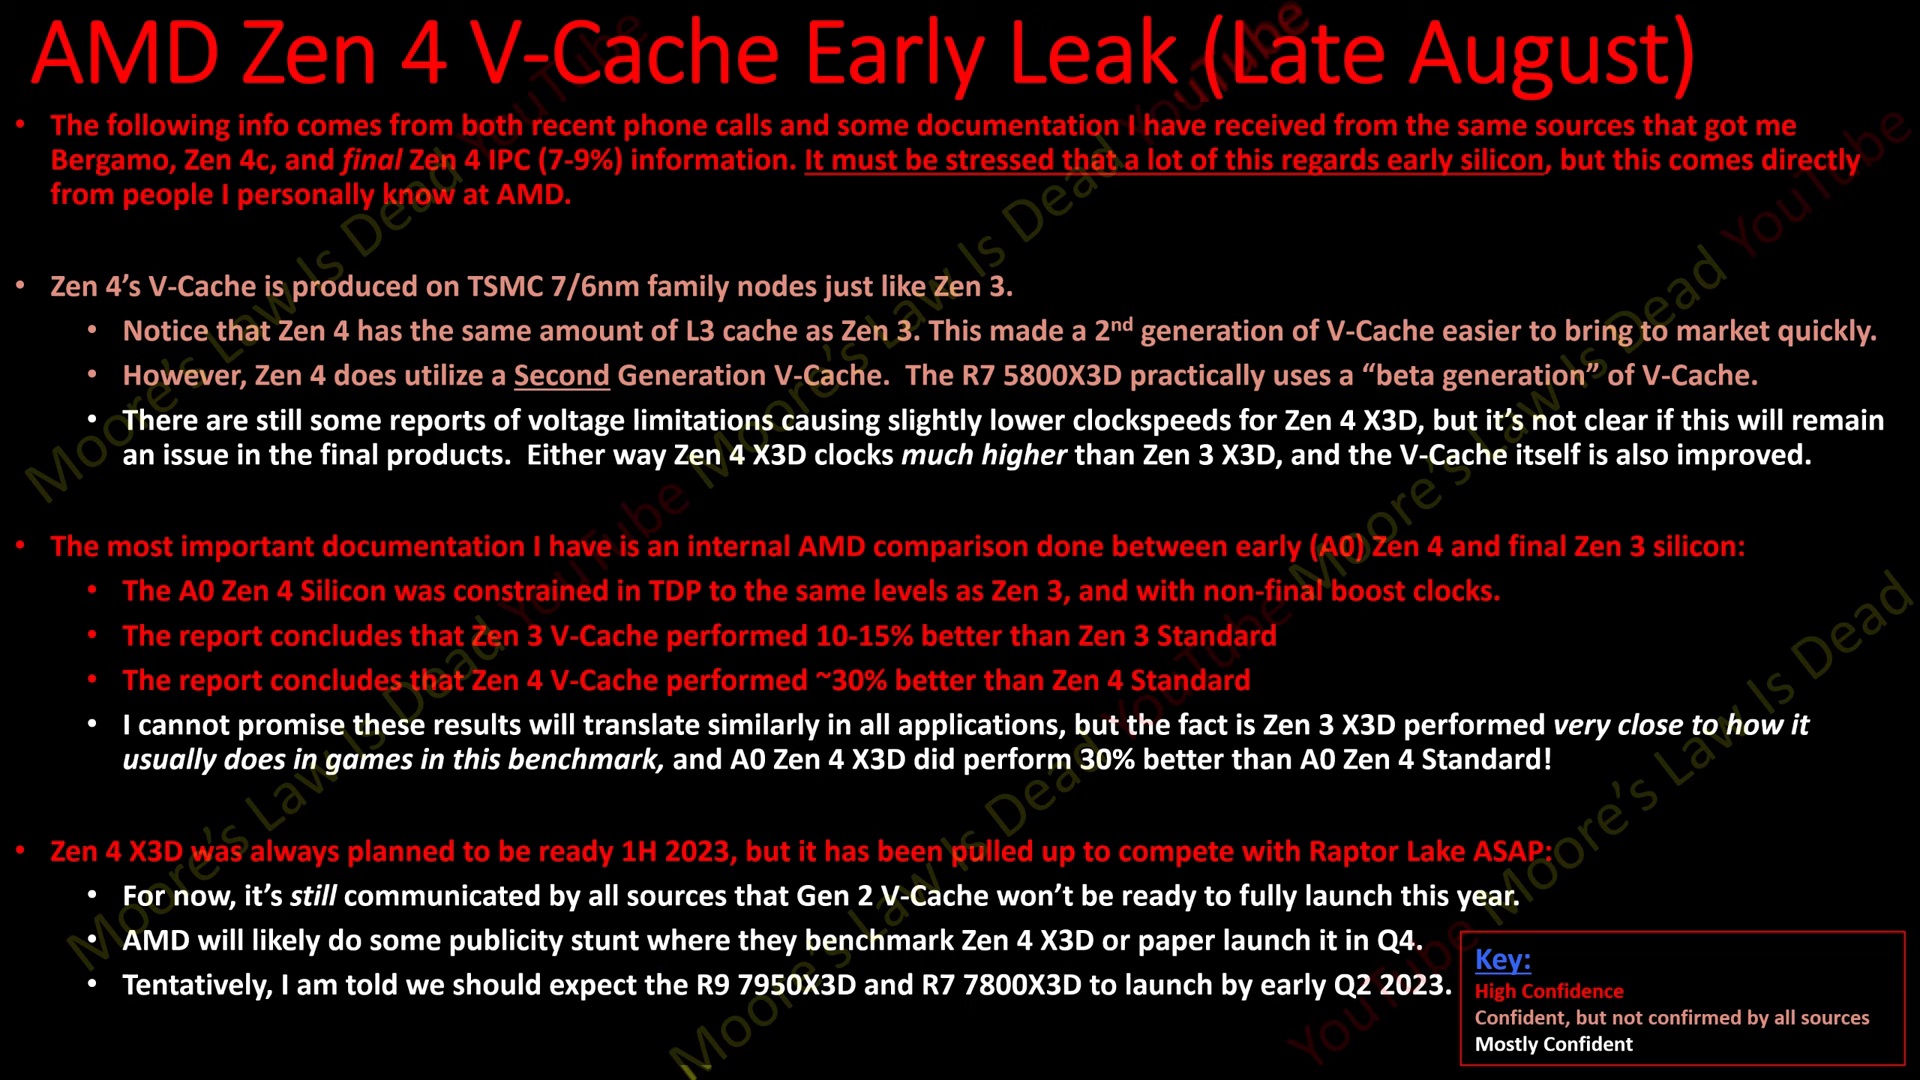 Speculations about the upcoming AMD Zen 4 3D V-Cache chips.